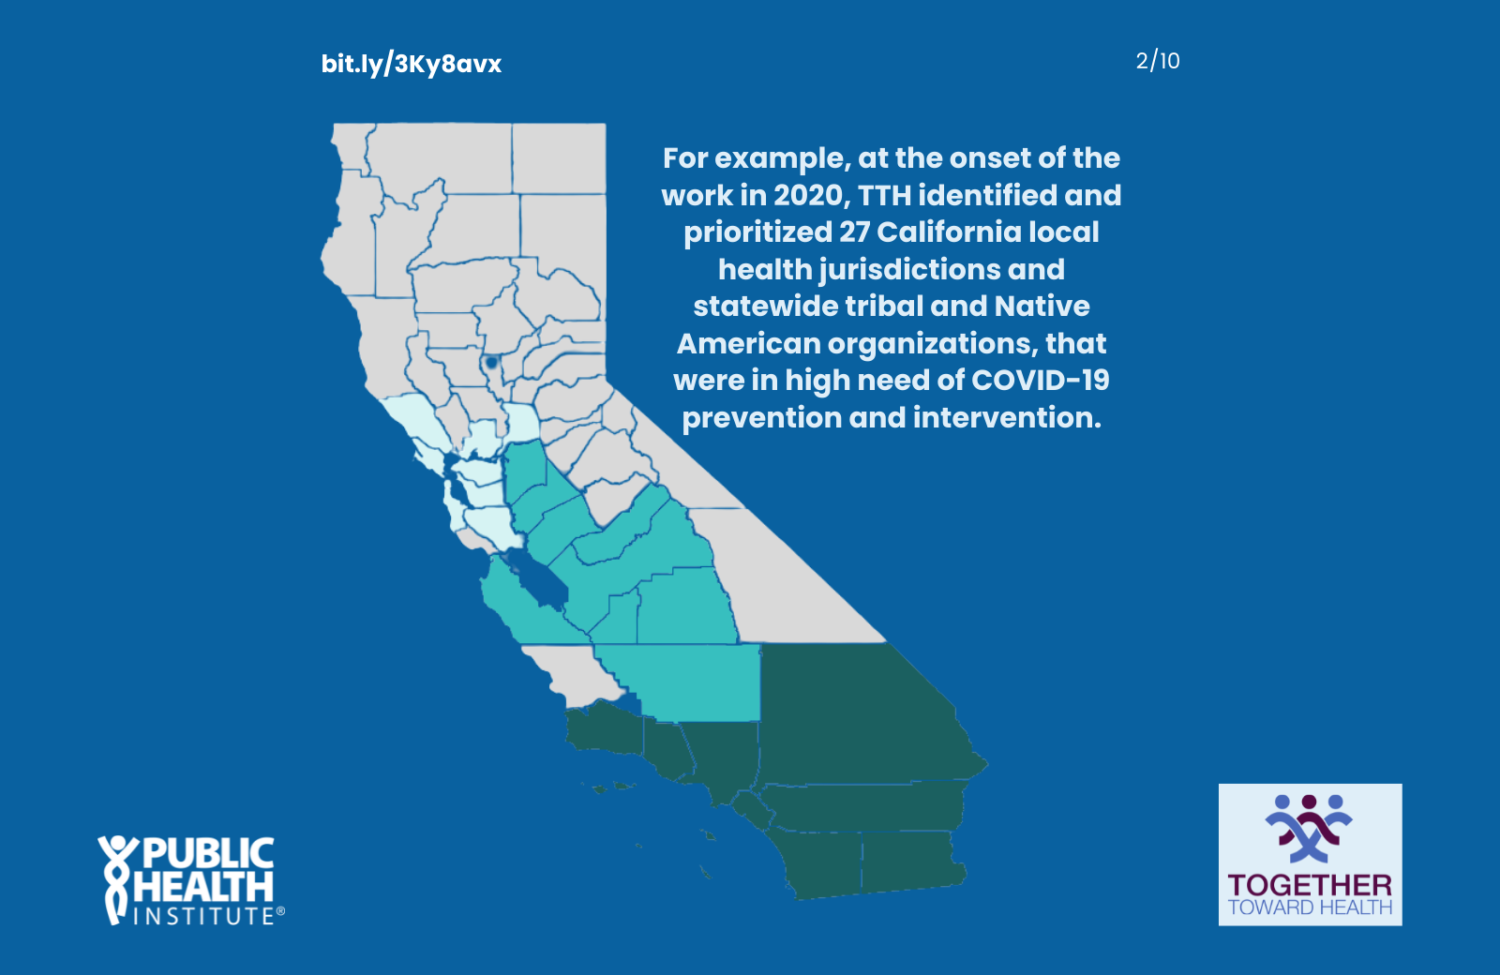 For example, at the onset of the work in 2020, TTH identified and prioritized 27 California local health jurisdictions and statewide tribal and Native American organizations, that were in high need of COVID-19 prevention and intervention.